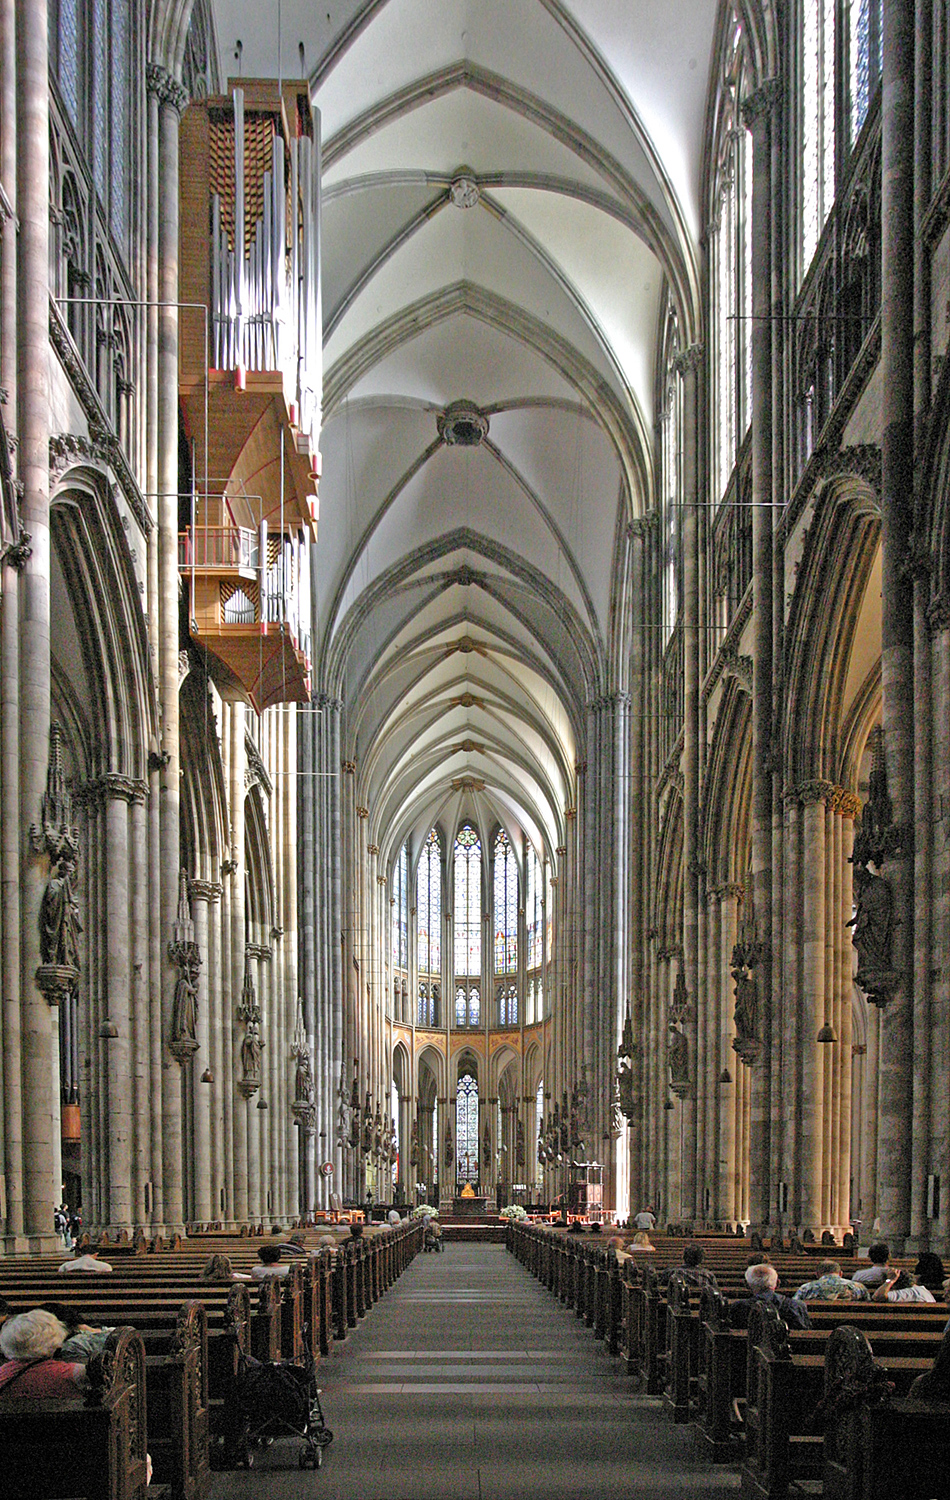 Cologne Cathedral Historical Facts and Pictures | The ...
